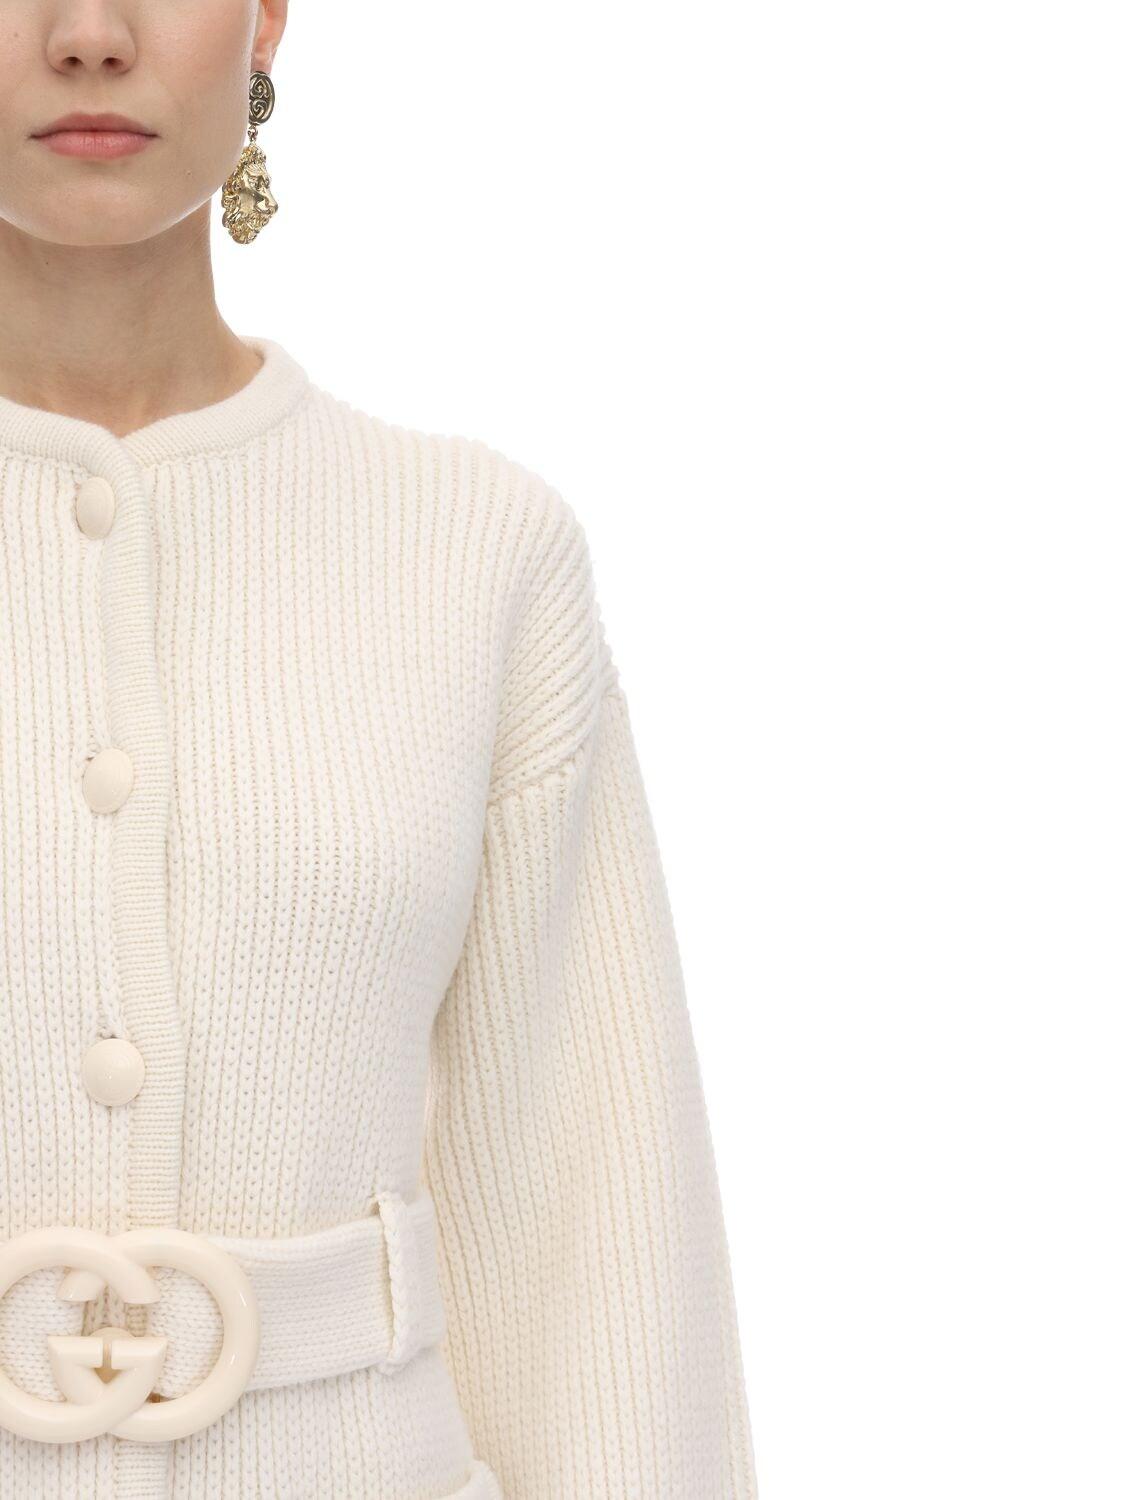 Gucci Gg Belted Wool Knit Maxi Cardigan in White | Lyst